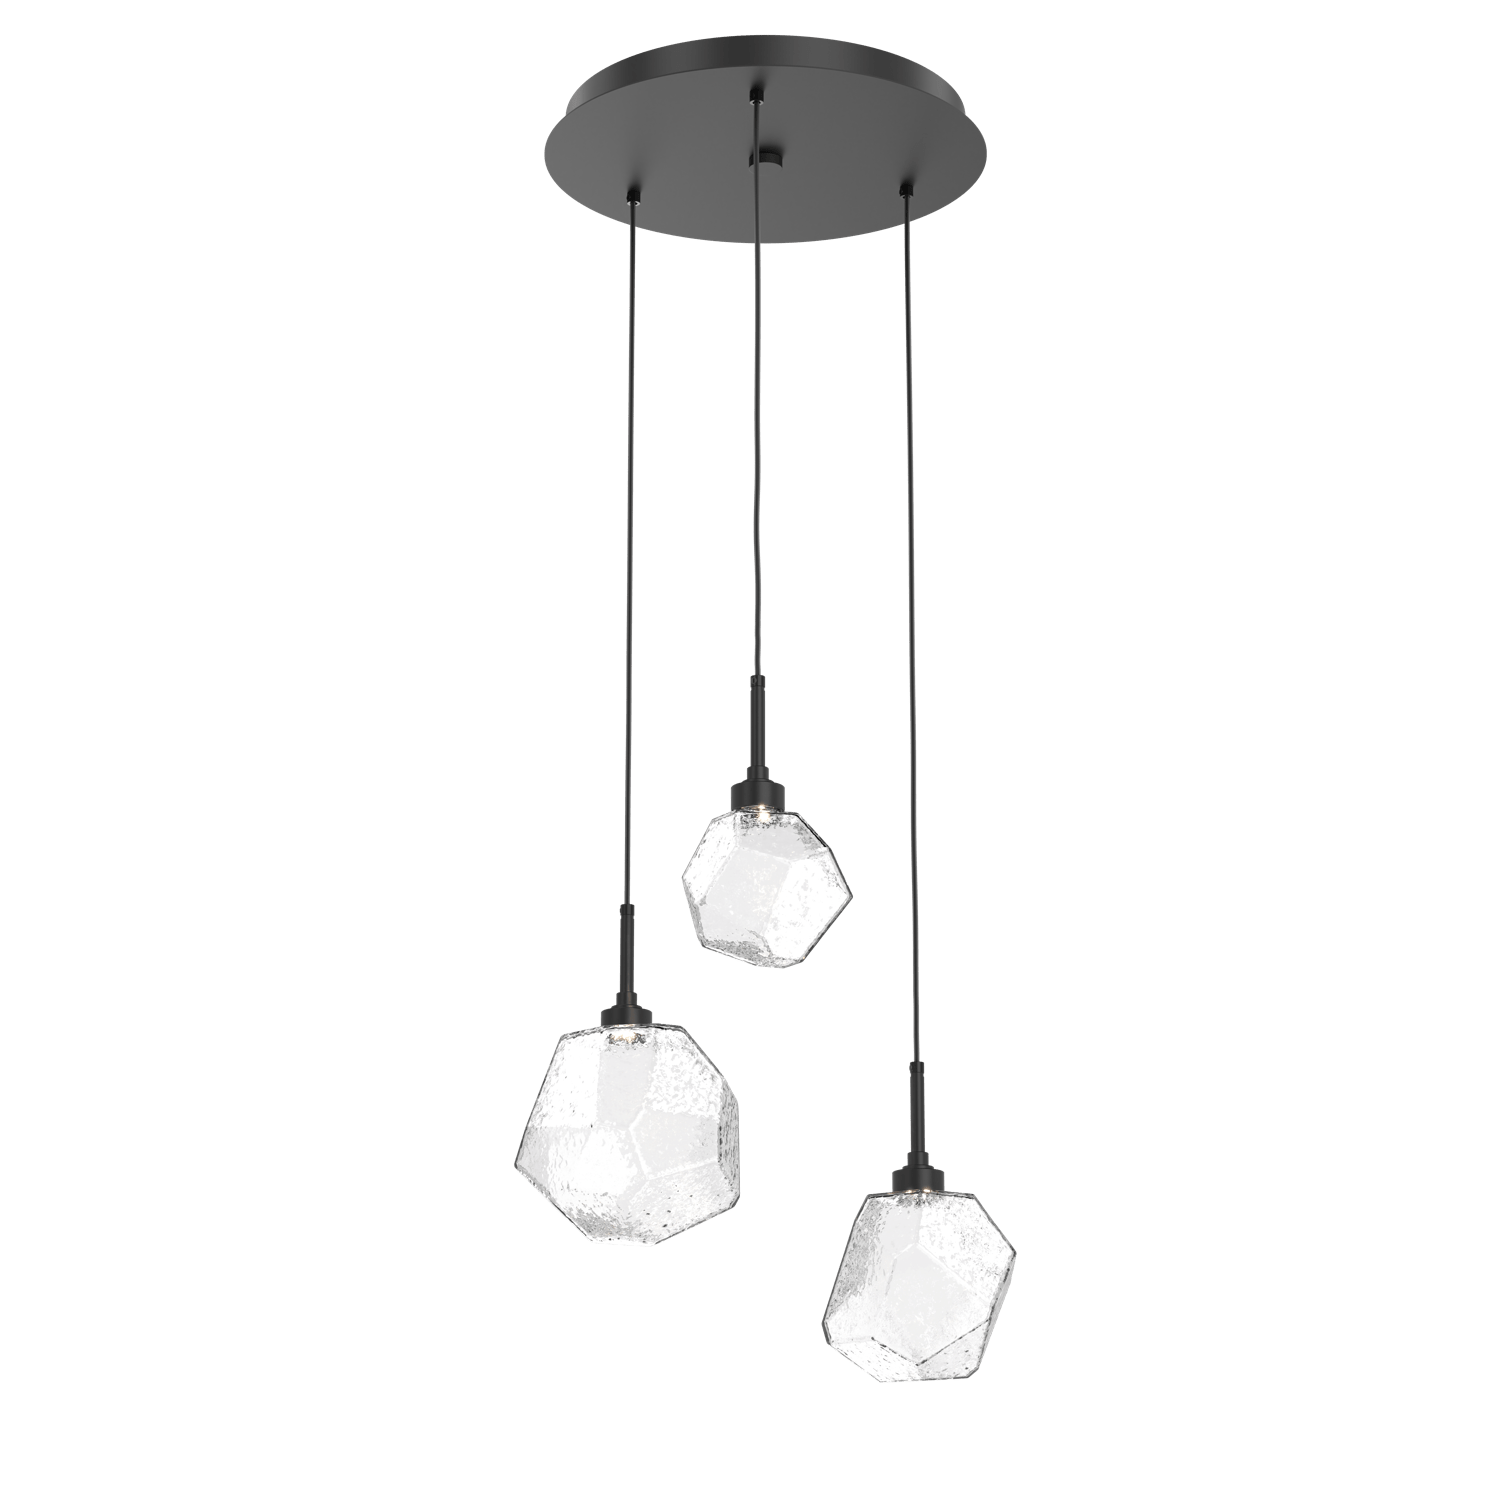 CHB0039-03-MB-C-Hammerton-Studio-Gem-3-light-round-pendant-chandelier-with-matte-black-finish-and-clear-blown-glass-shades-and-LED-lamping